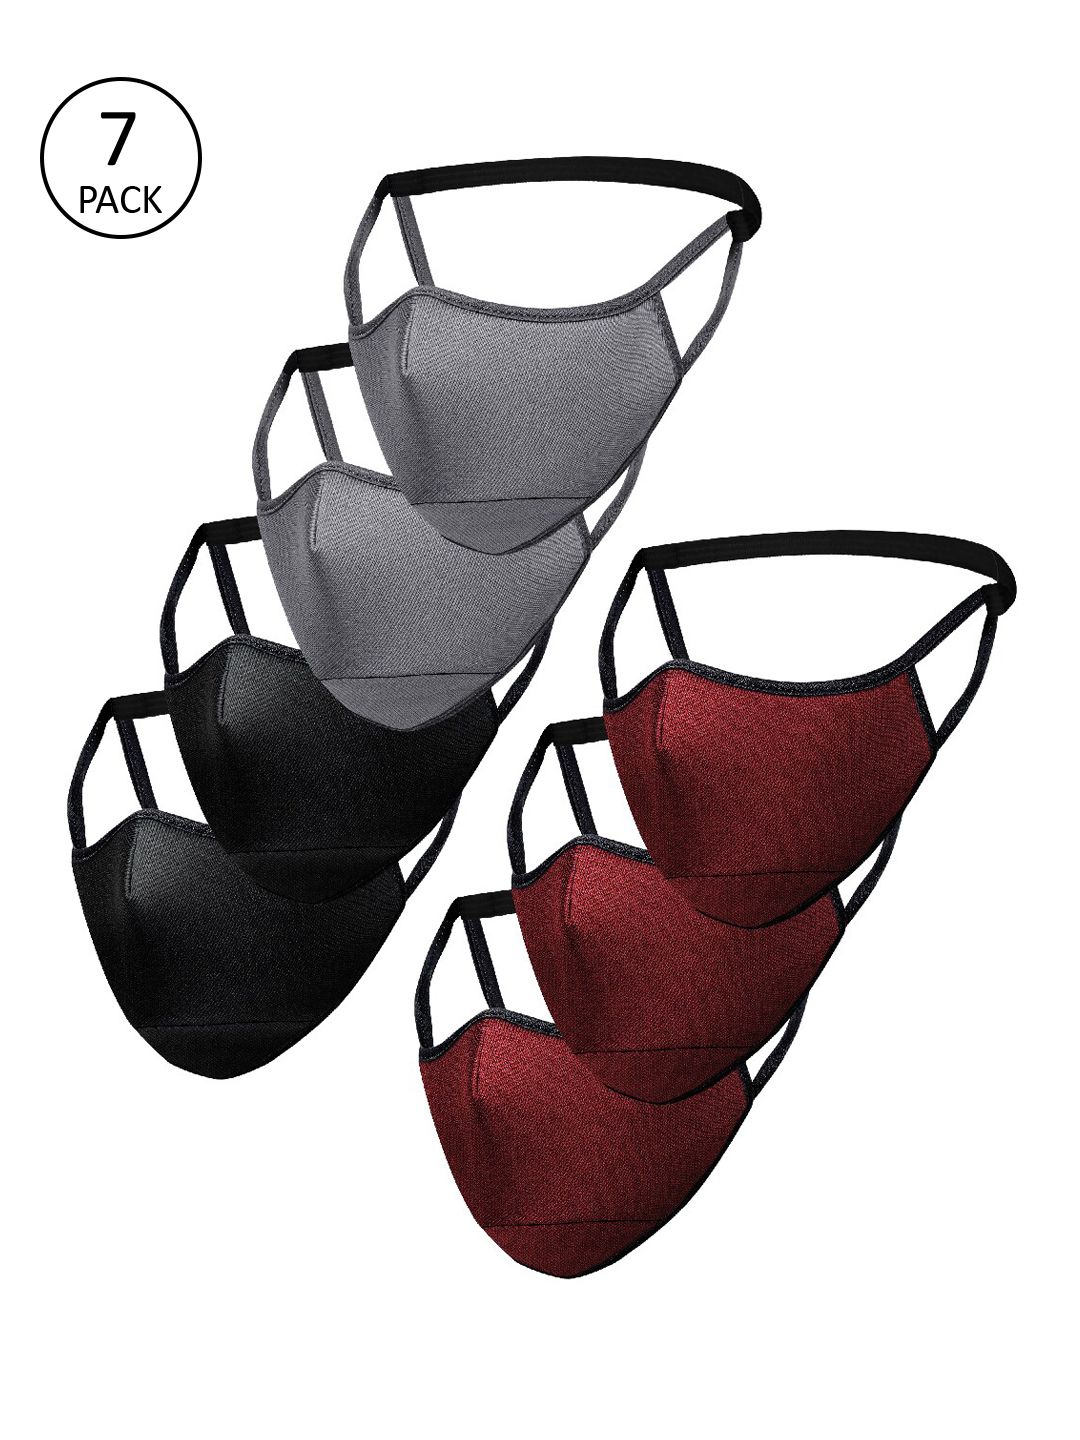 Impulse Unisex Multicoloured Pack Of 7 Reusable 4-Ply Cloth Masks Price in India